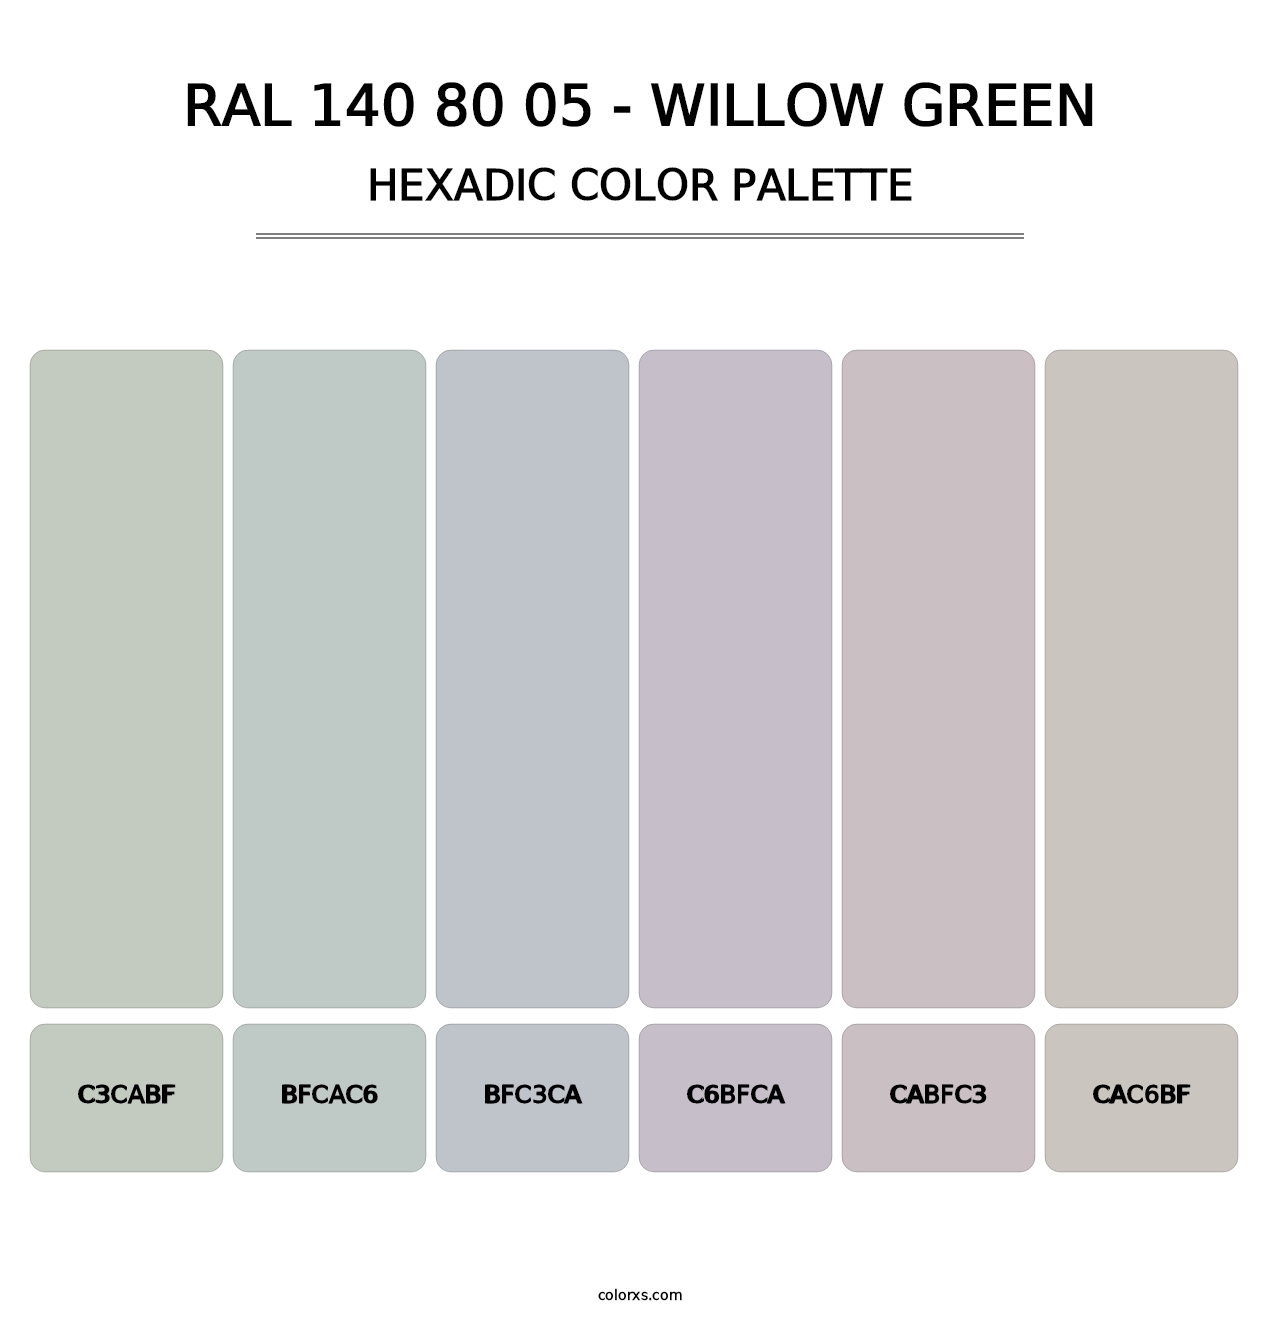 RAL 140 80 05 - Willow Green - Hexadic Color Palette